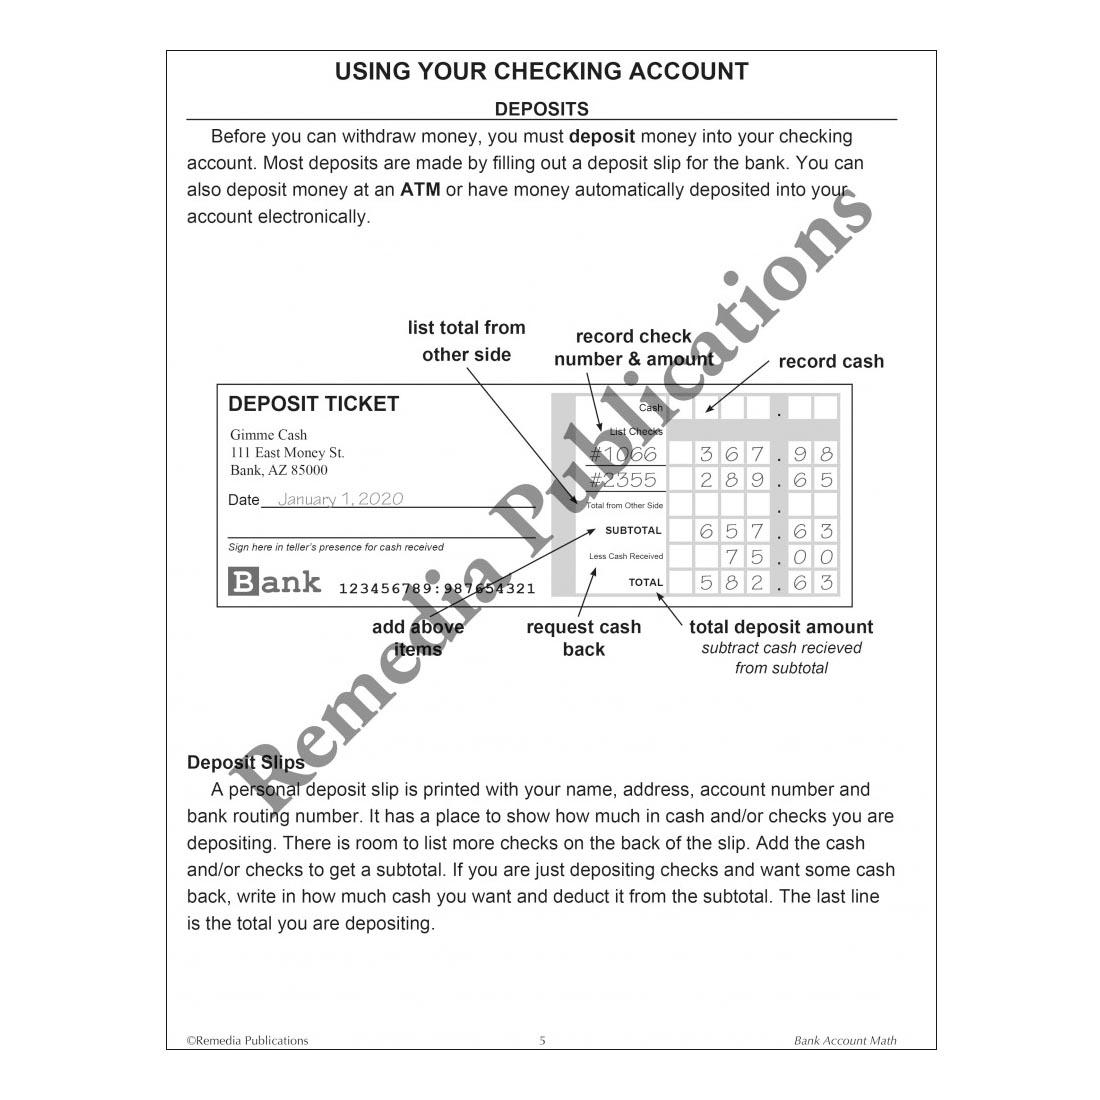 page 5 from Bank Account Math book with the watermark Remedia Publications